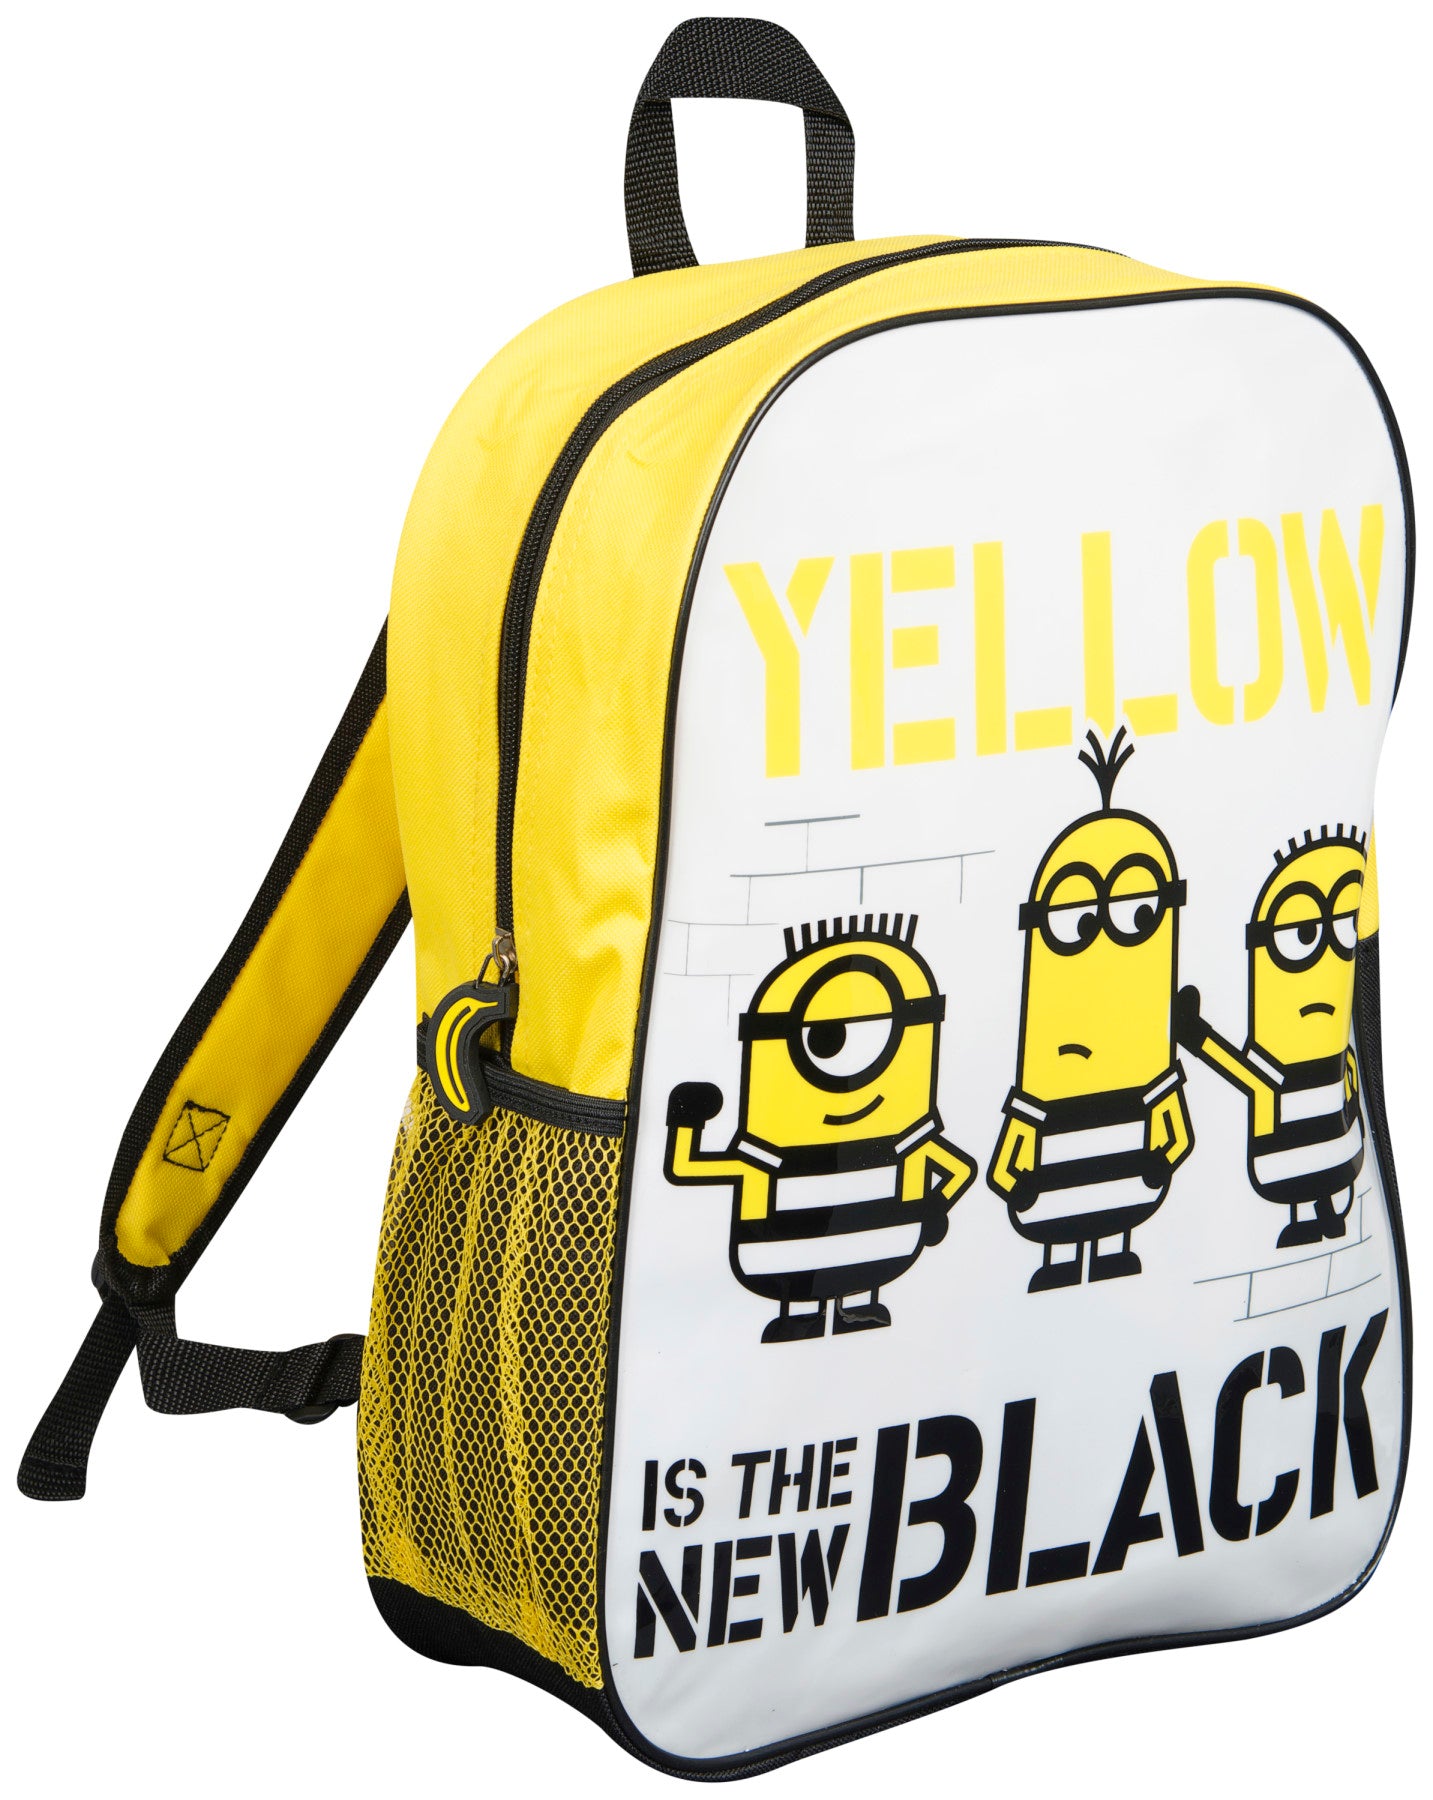 Despicable Me 3 Minions “Yellow is the new Black” Backpack